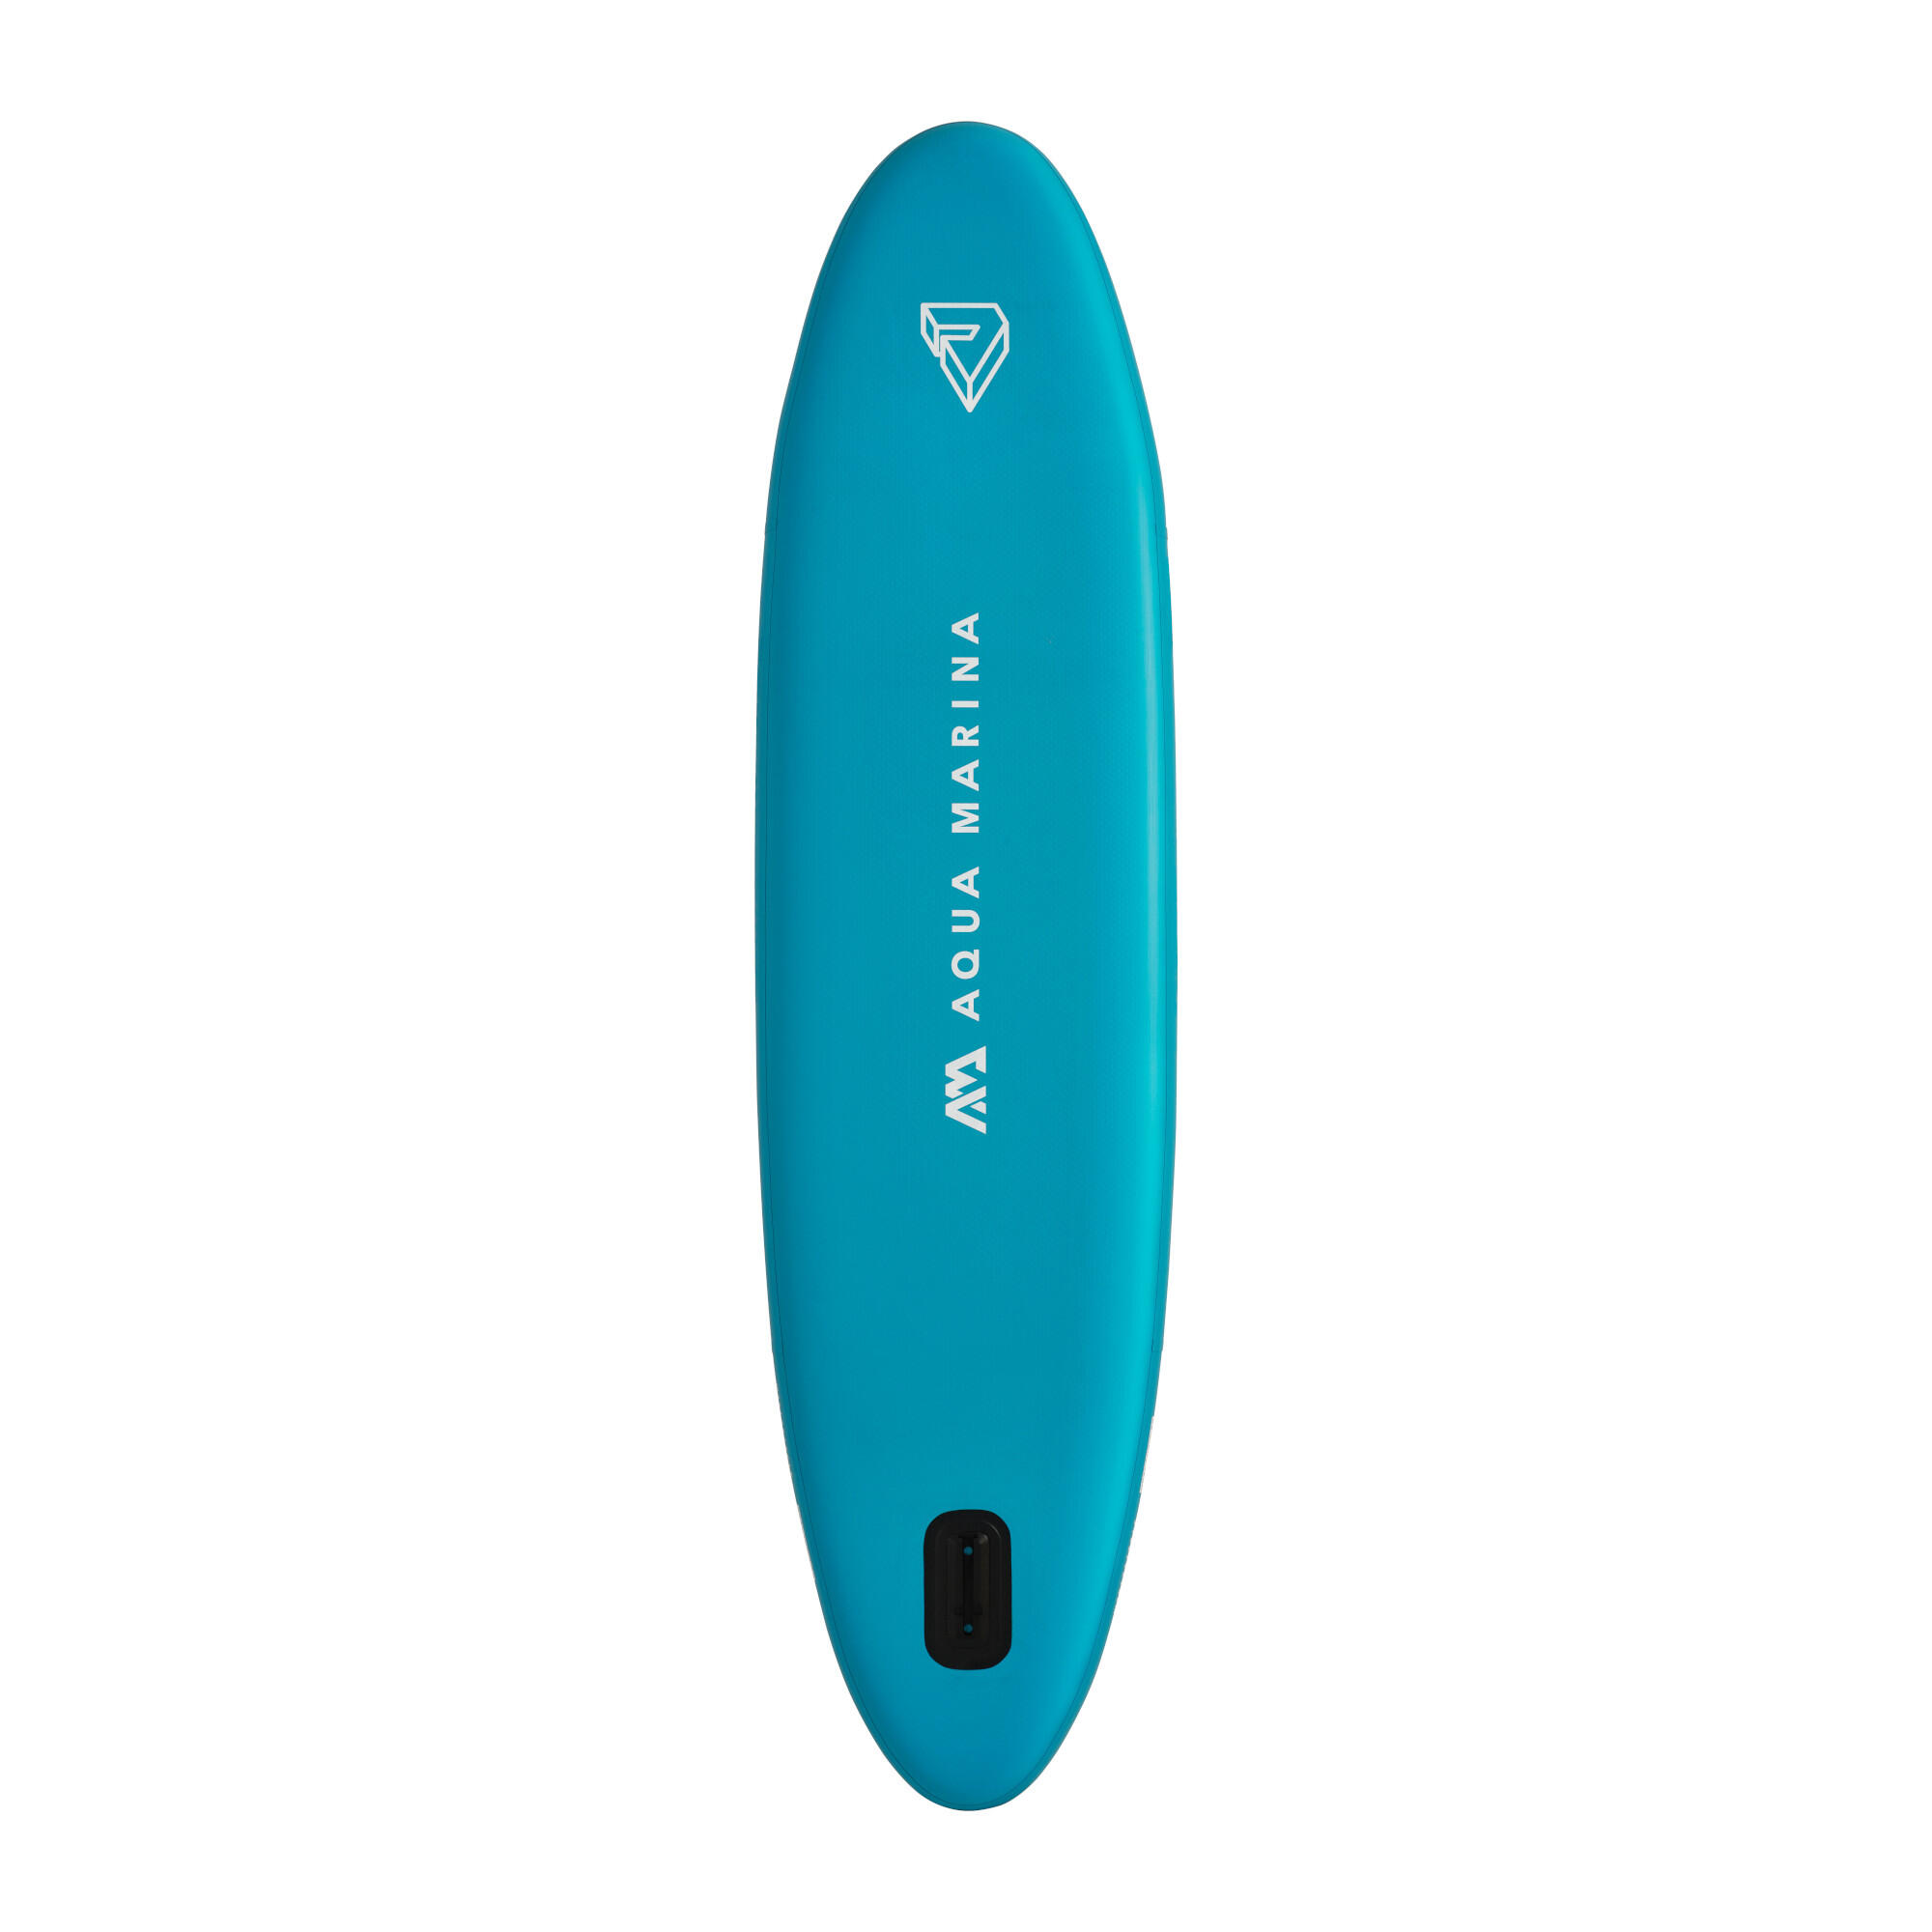 Aqua Marina Vapor stand-up paddle board package 10ft4/315cm 5/16